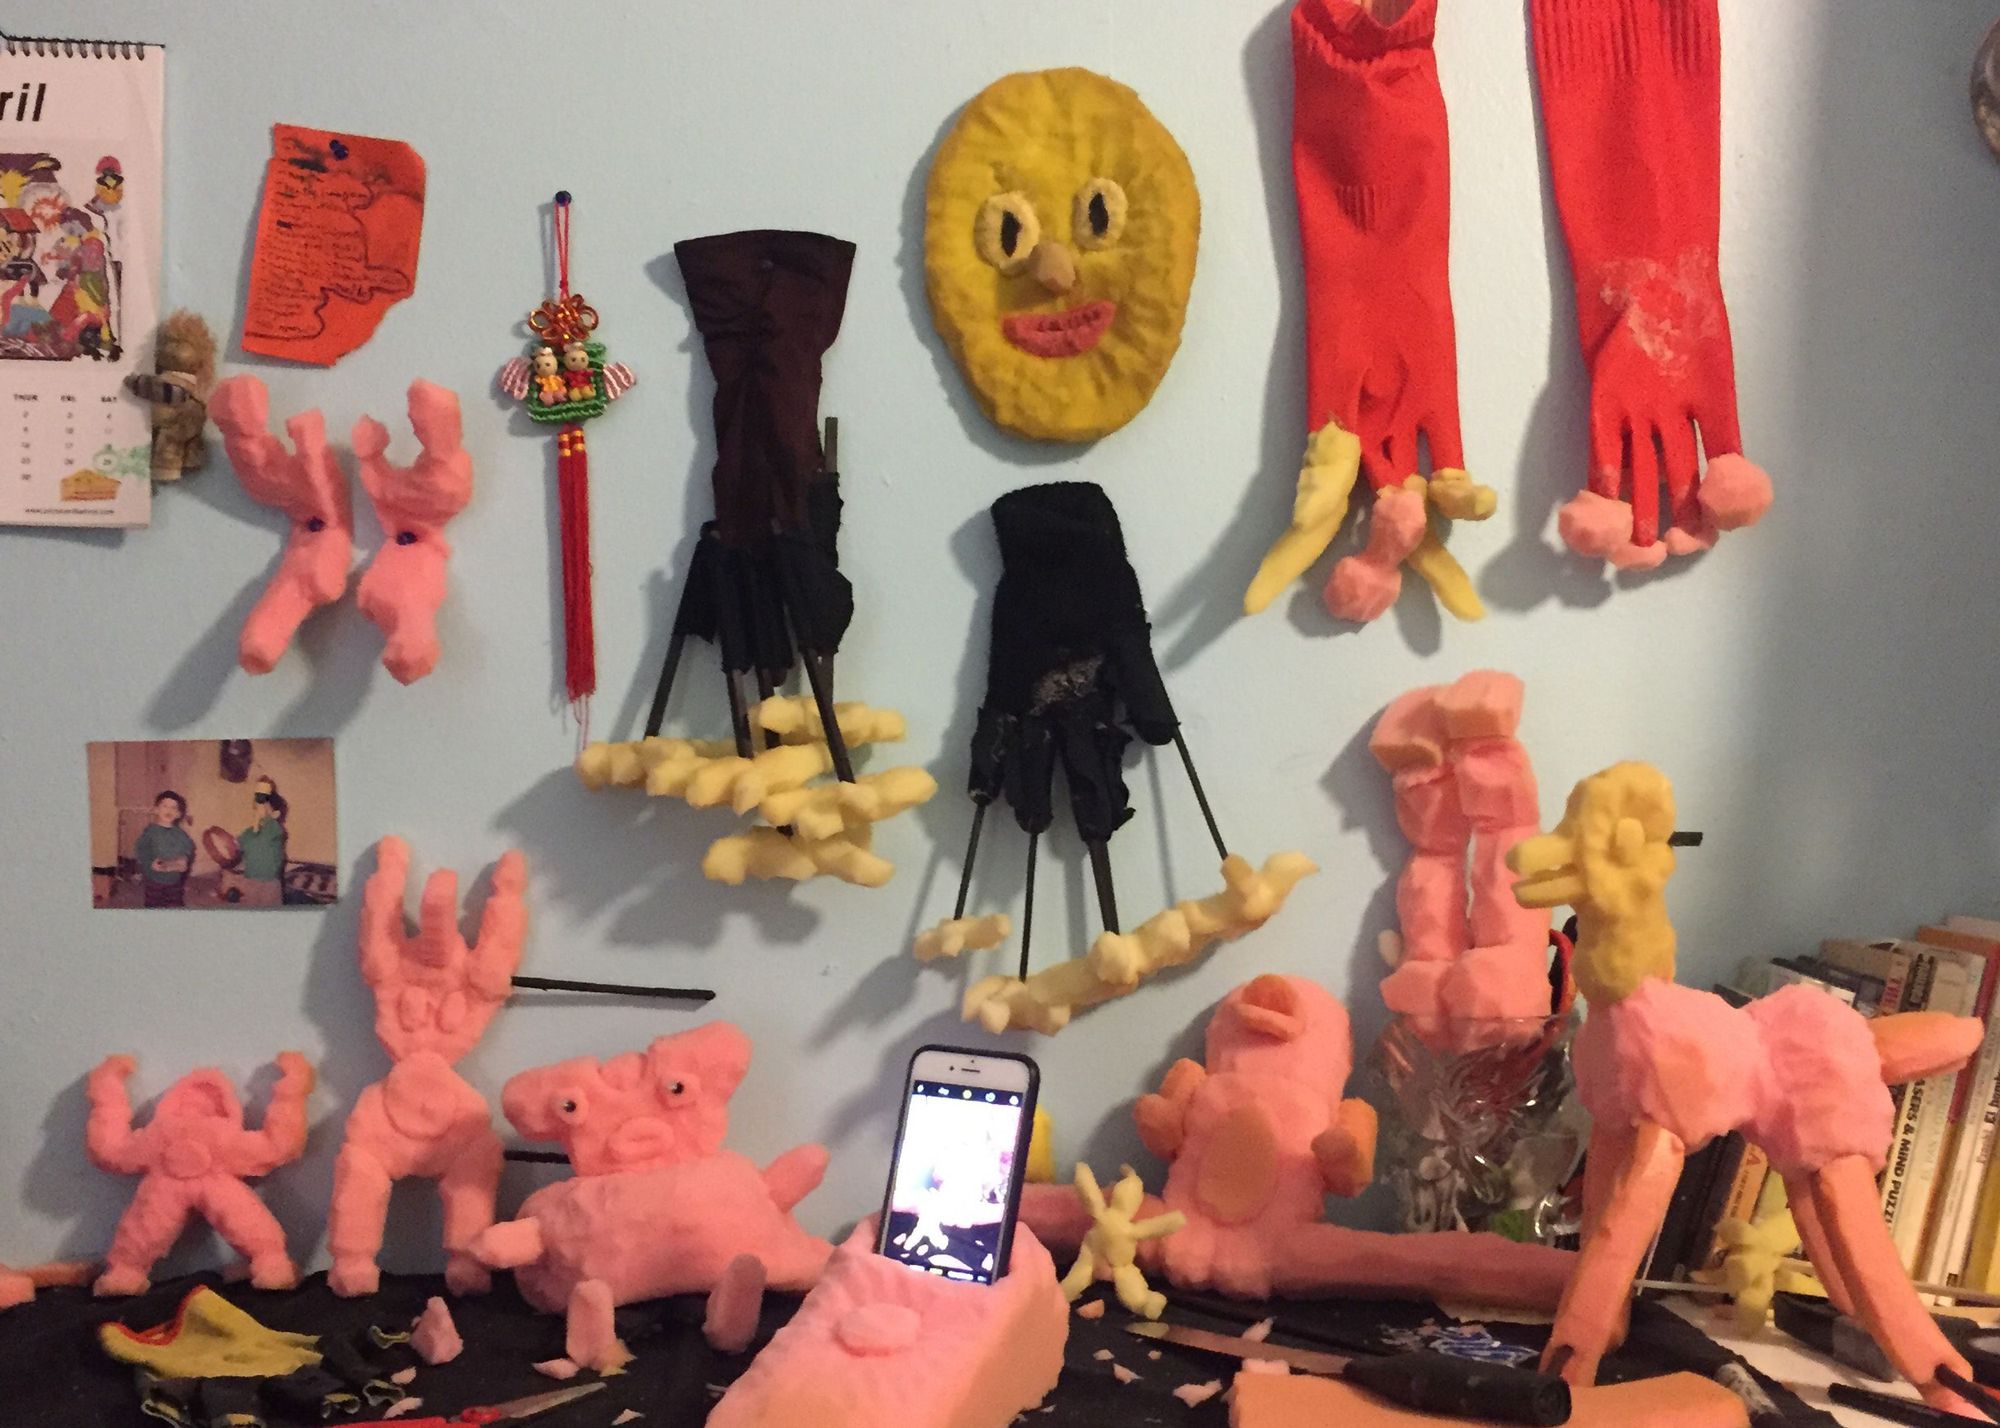 A desk covered in pink foam puppets and a cellphone, with performance gloves, puppets, and pictures hanging on the wall above it